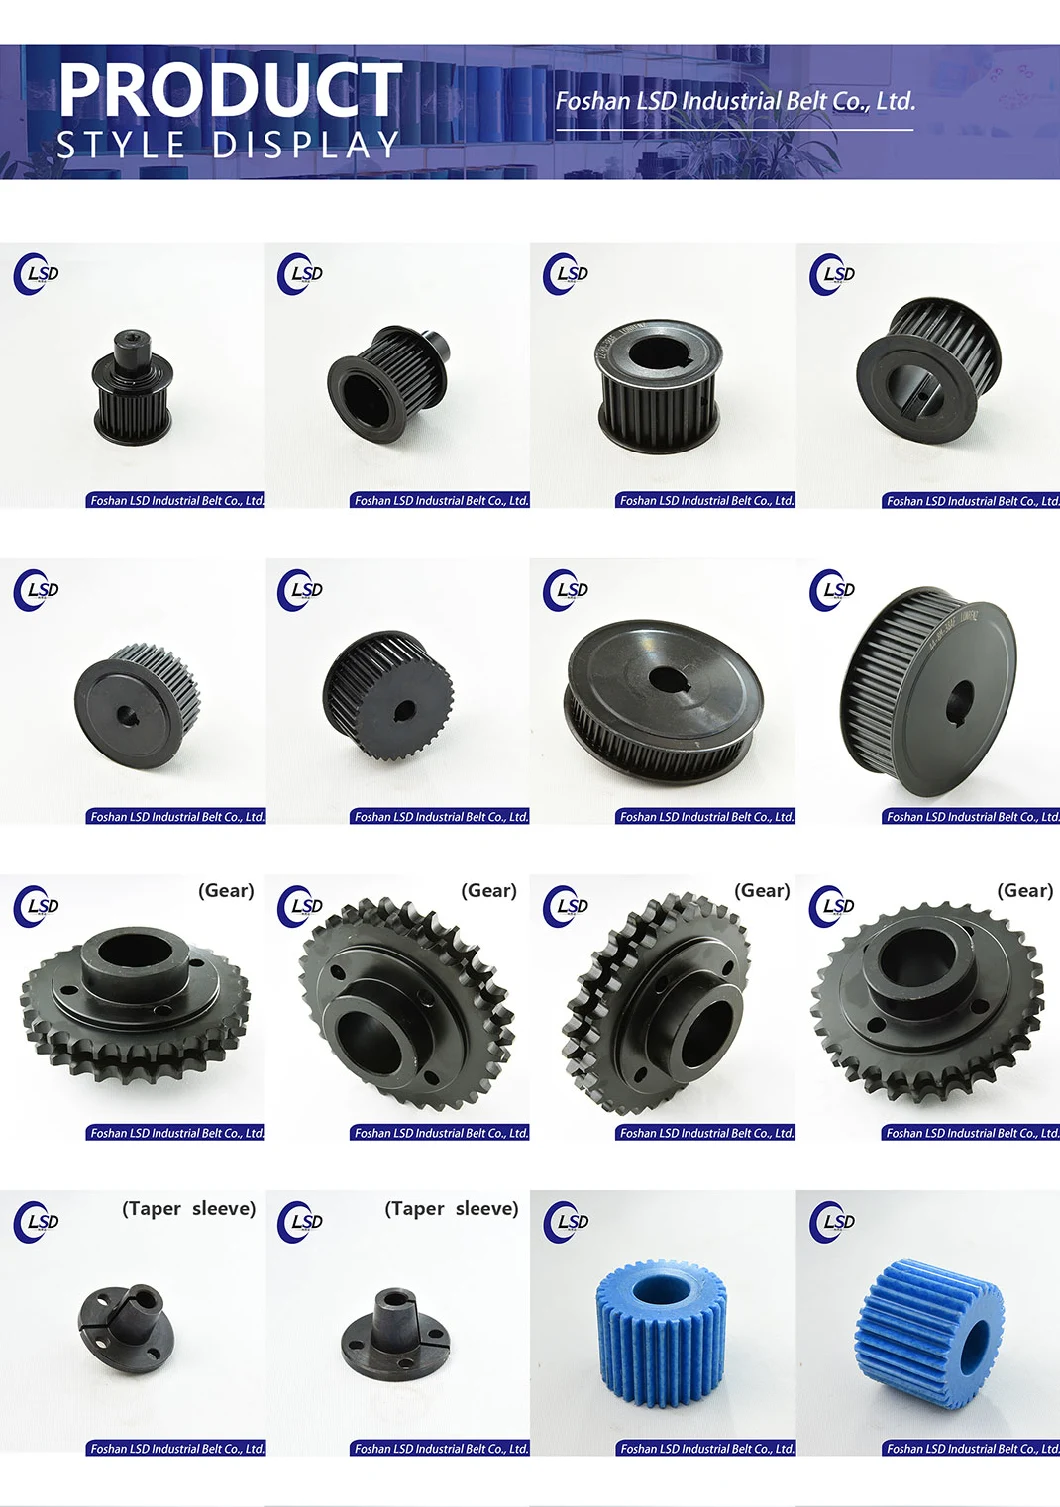 Customized High-Precision Aluminum Stainless-Steel Nylon Roller Chain Sprocket Transmission Timing Belt Pulley